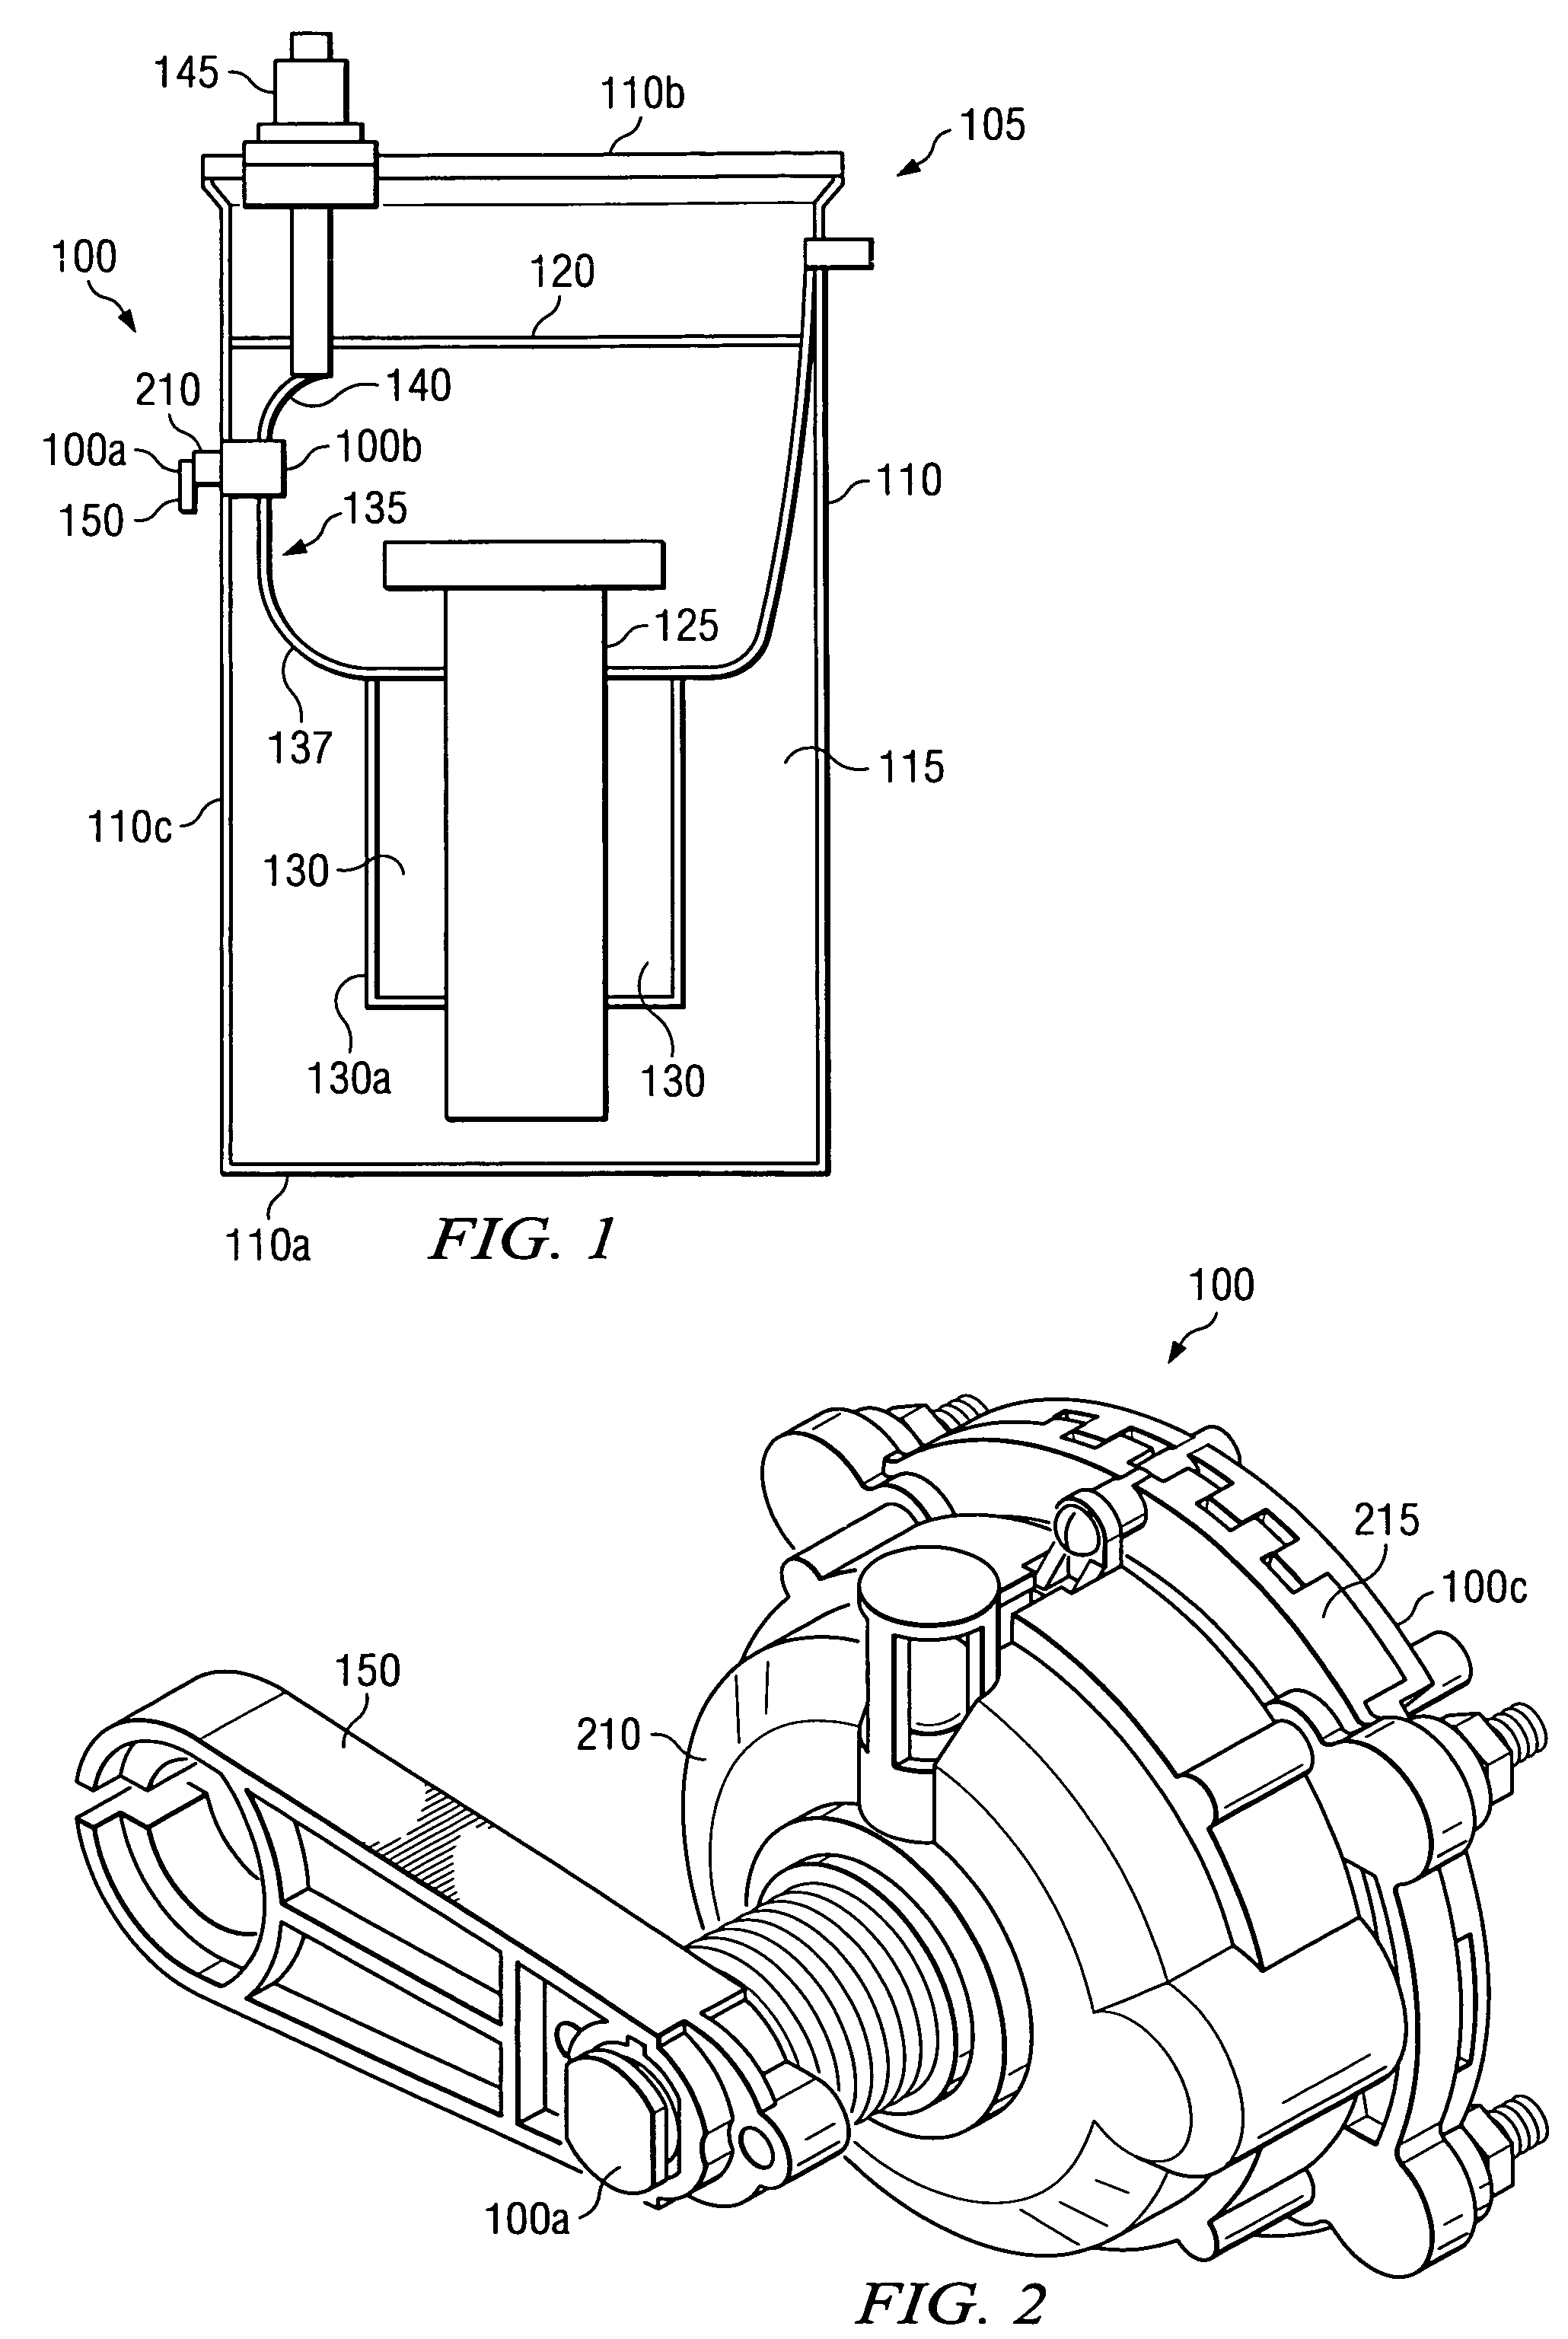 Multiple arc chamber assemblies for a fault interrupter and load break switch